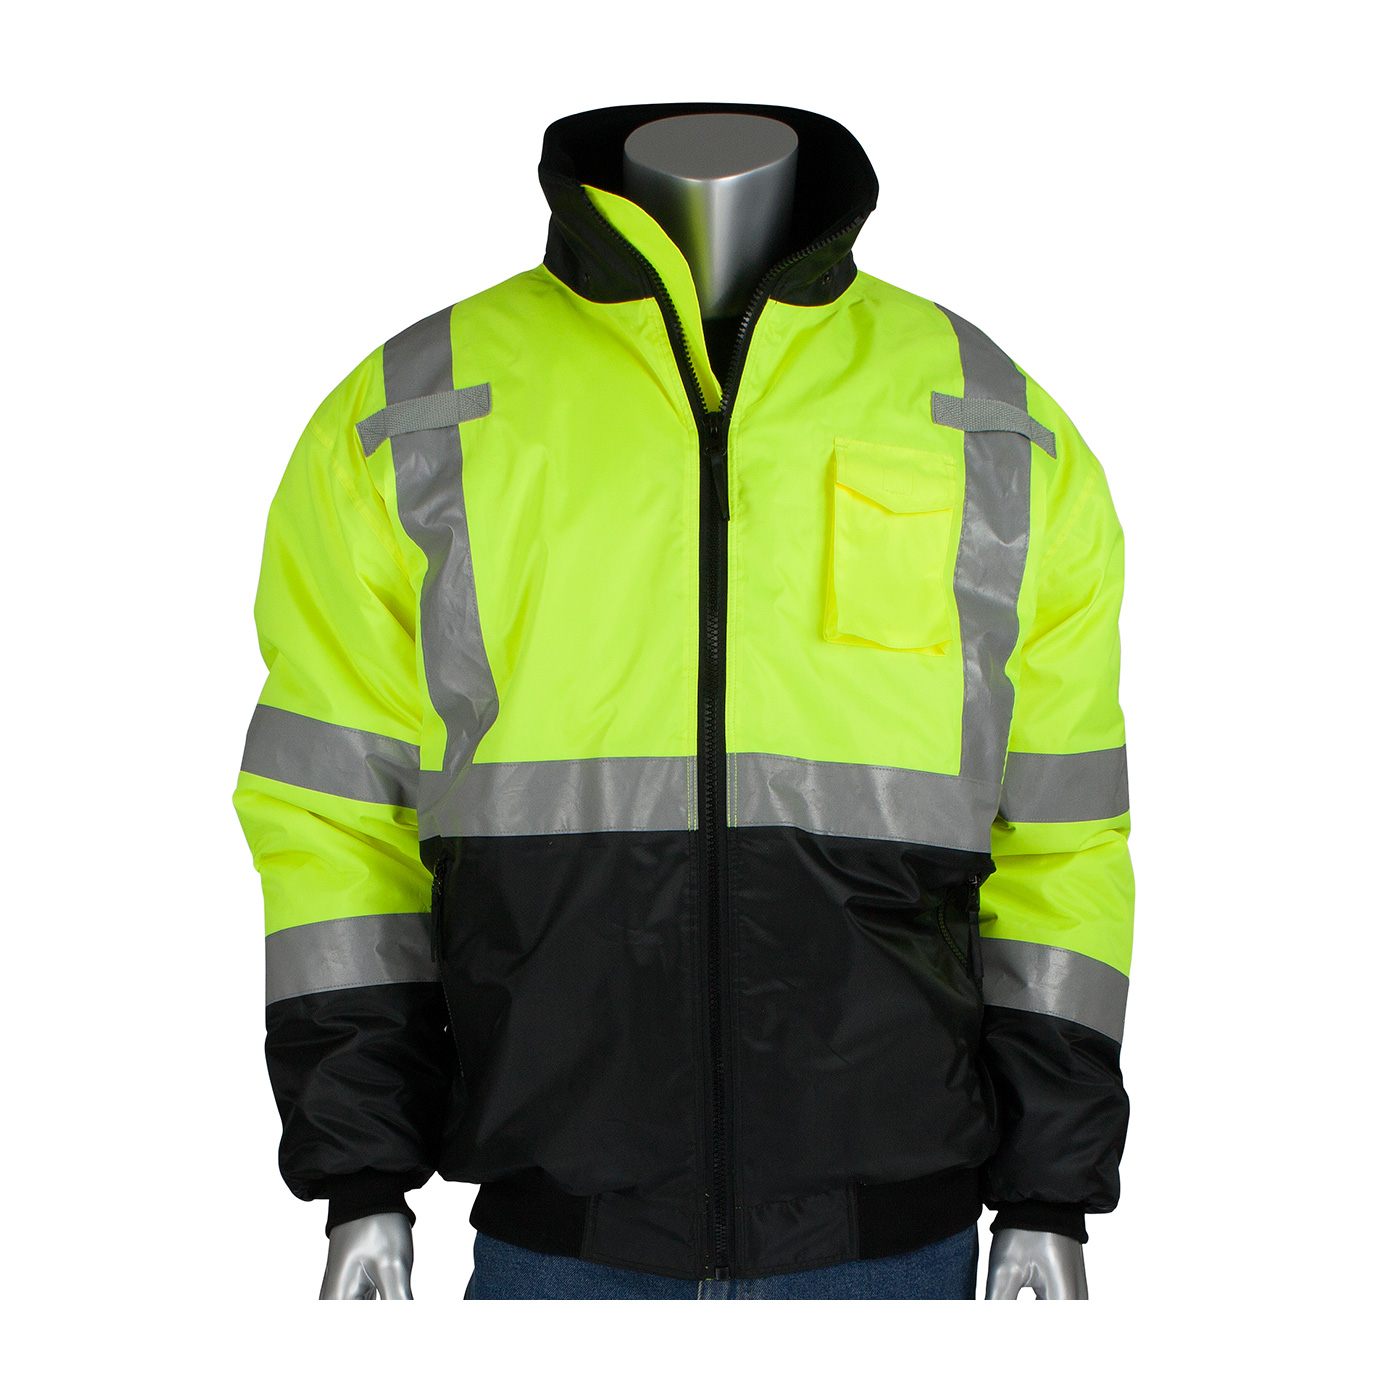 PIP Lime Class 3 Fleece Liner Jacket - Safety Products